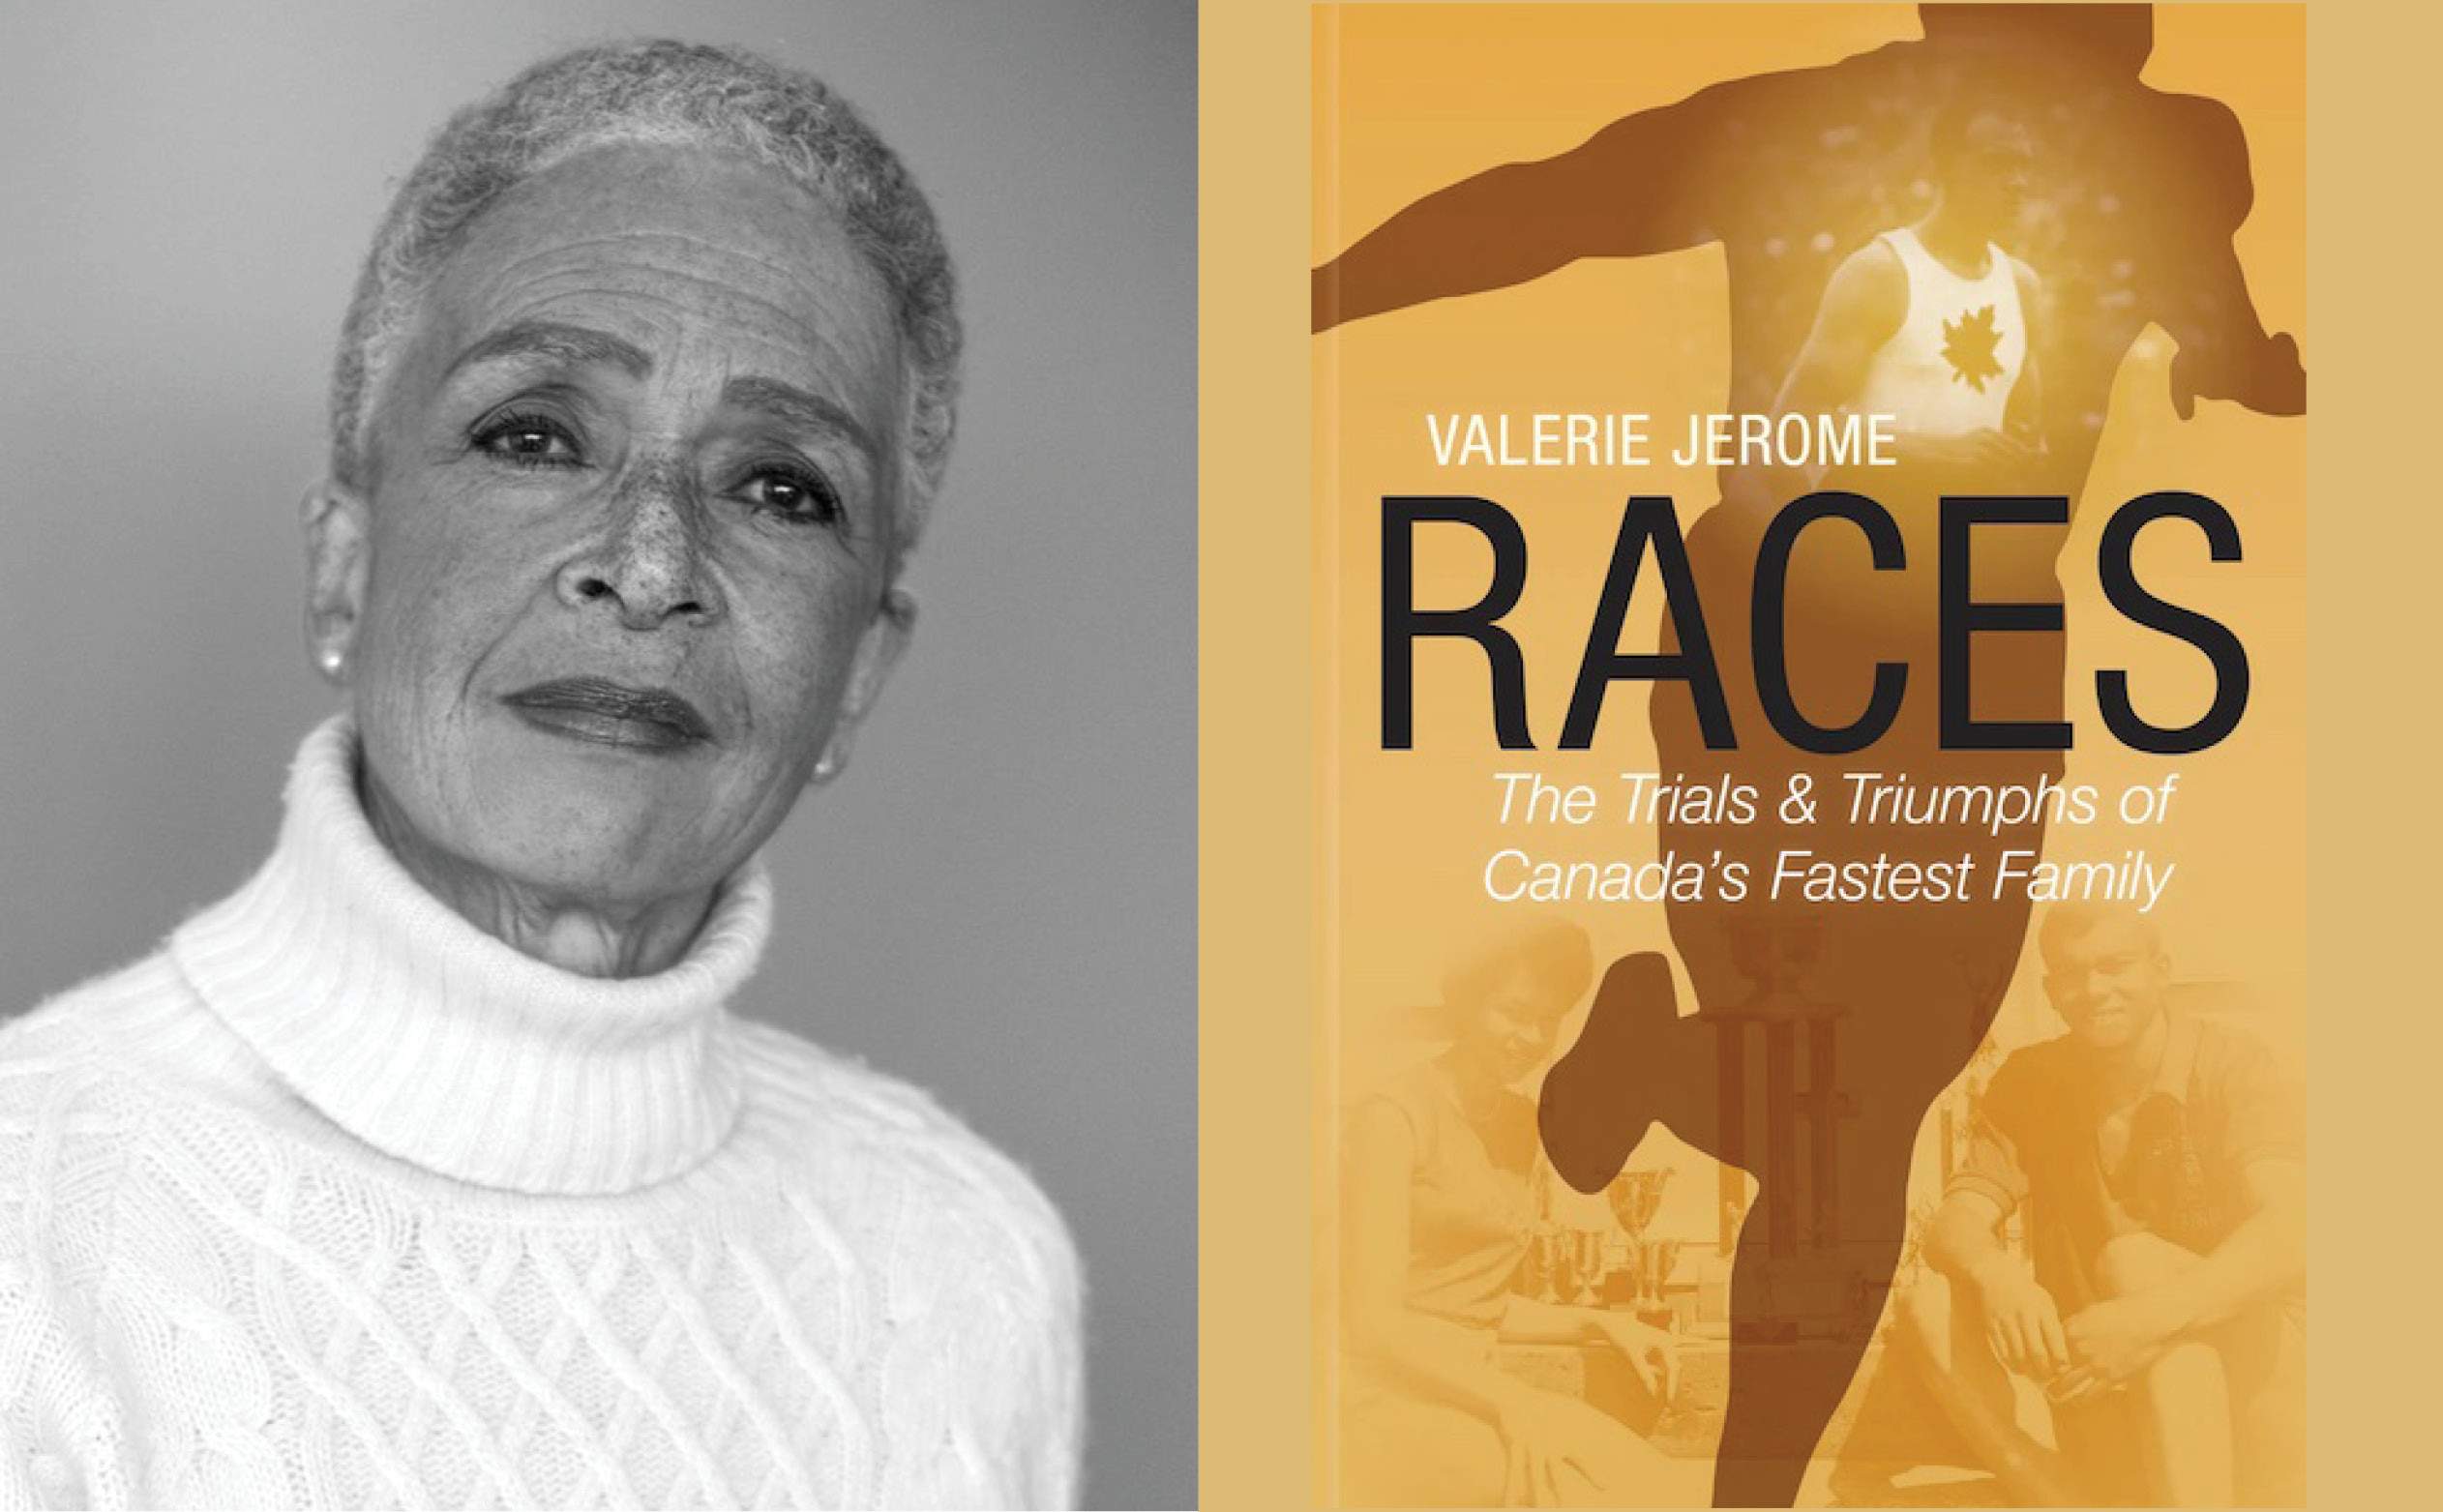 Black and white photo of black author Valerie in a white turtleneck next to the cover of her book "Races" which is a sepia photo of her brother running with the title across the middle.